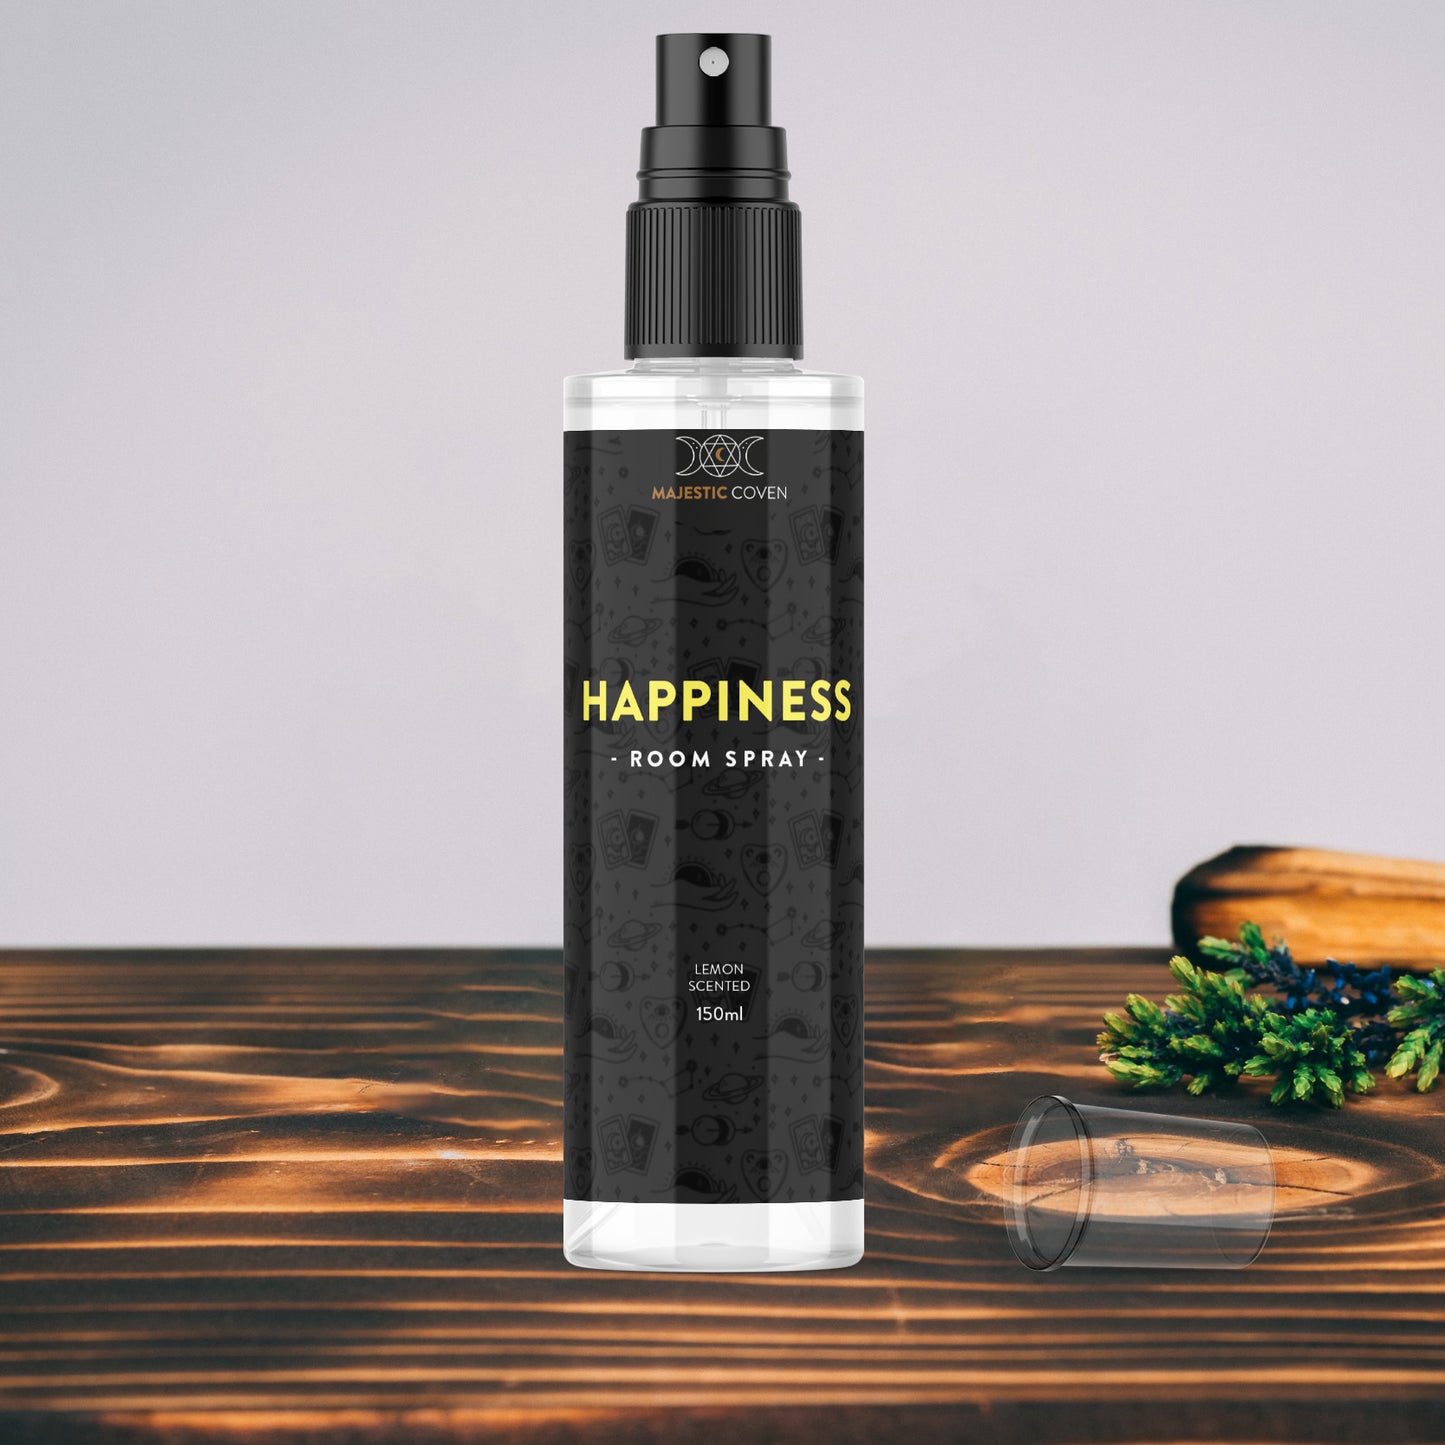 Happiness - Room Spray Majestic Coven